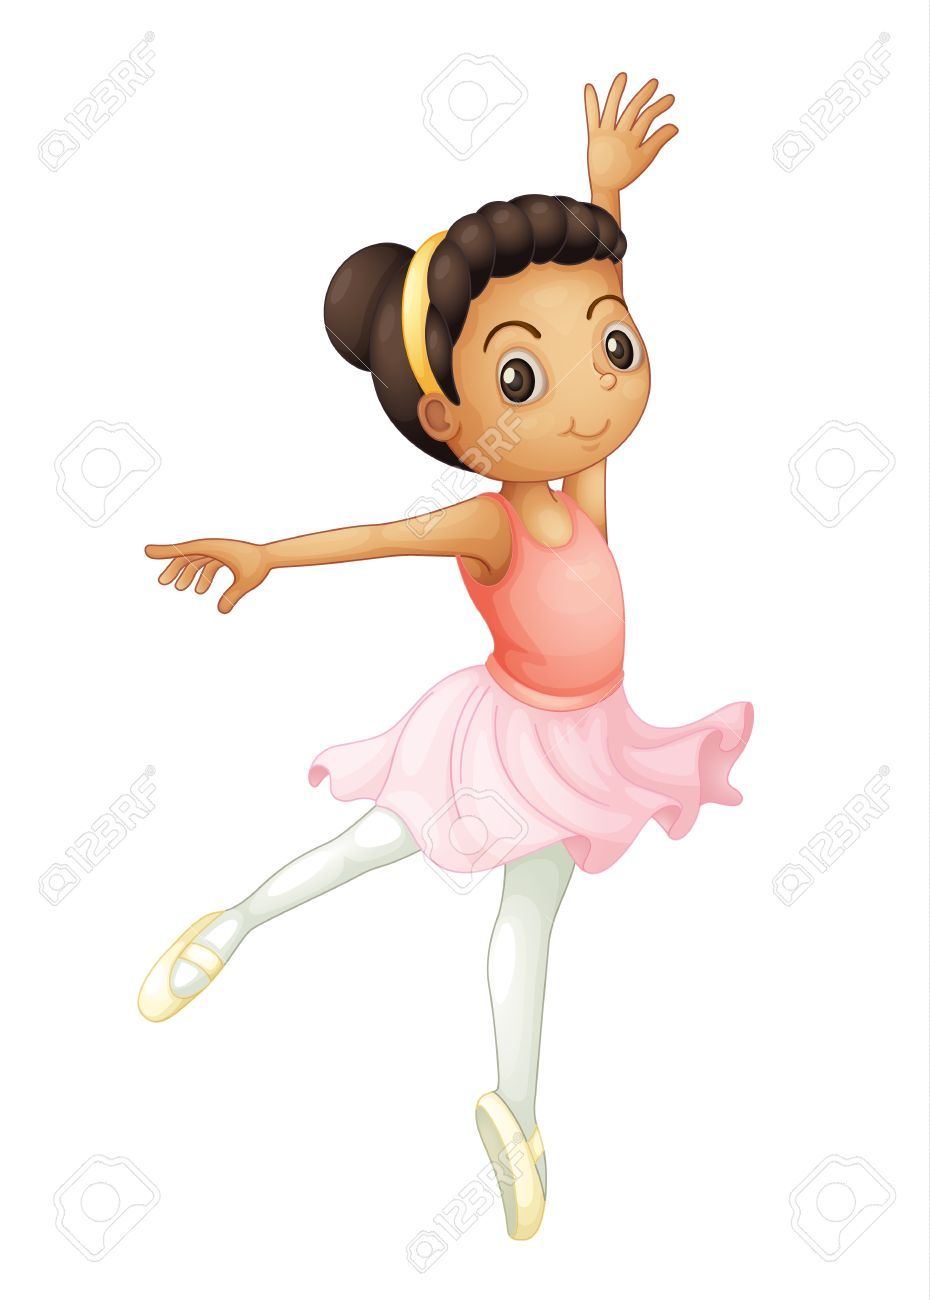 Free Clipart Of Girl Dancing